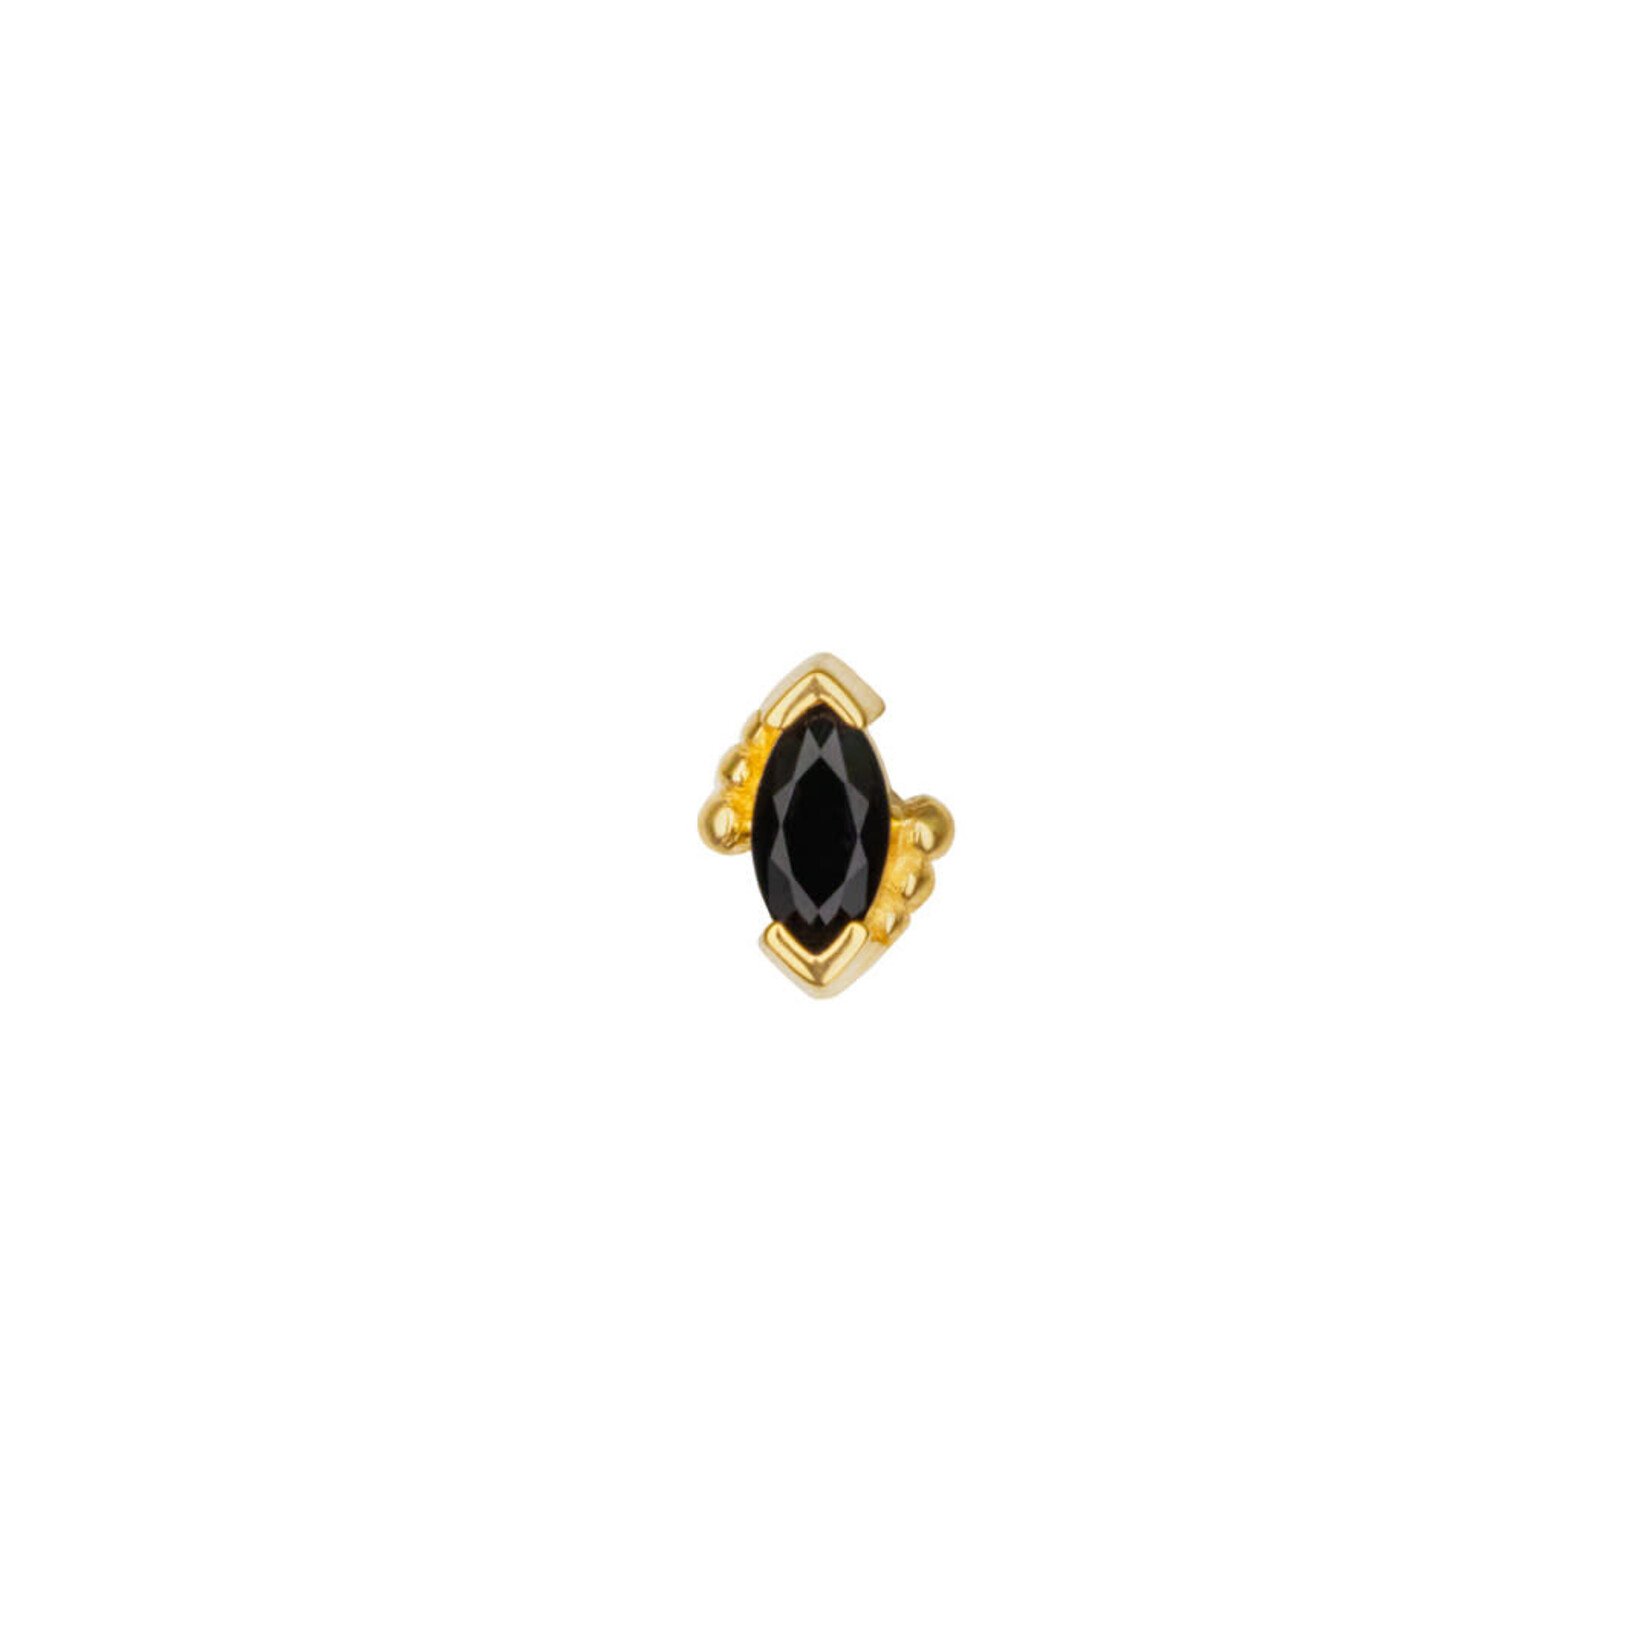 BVLA BVLA "Beaded Marquise" press fit end with 4x2 Black CZ